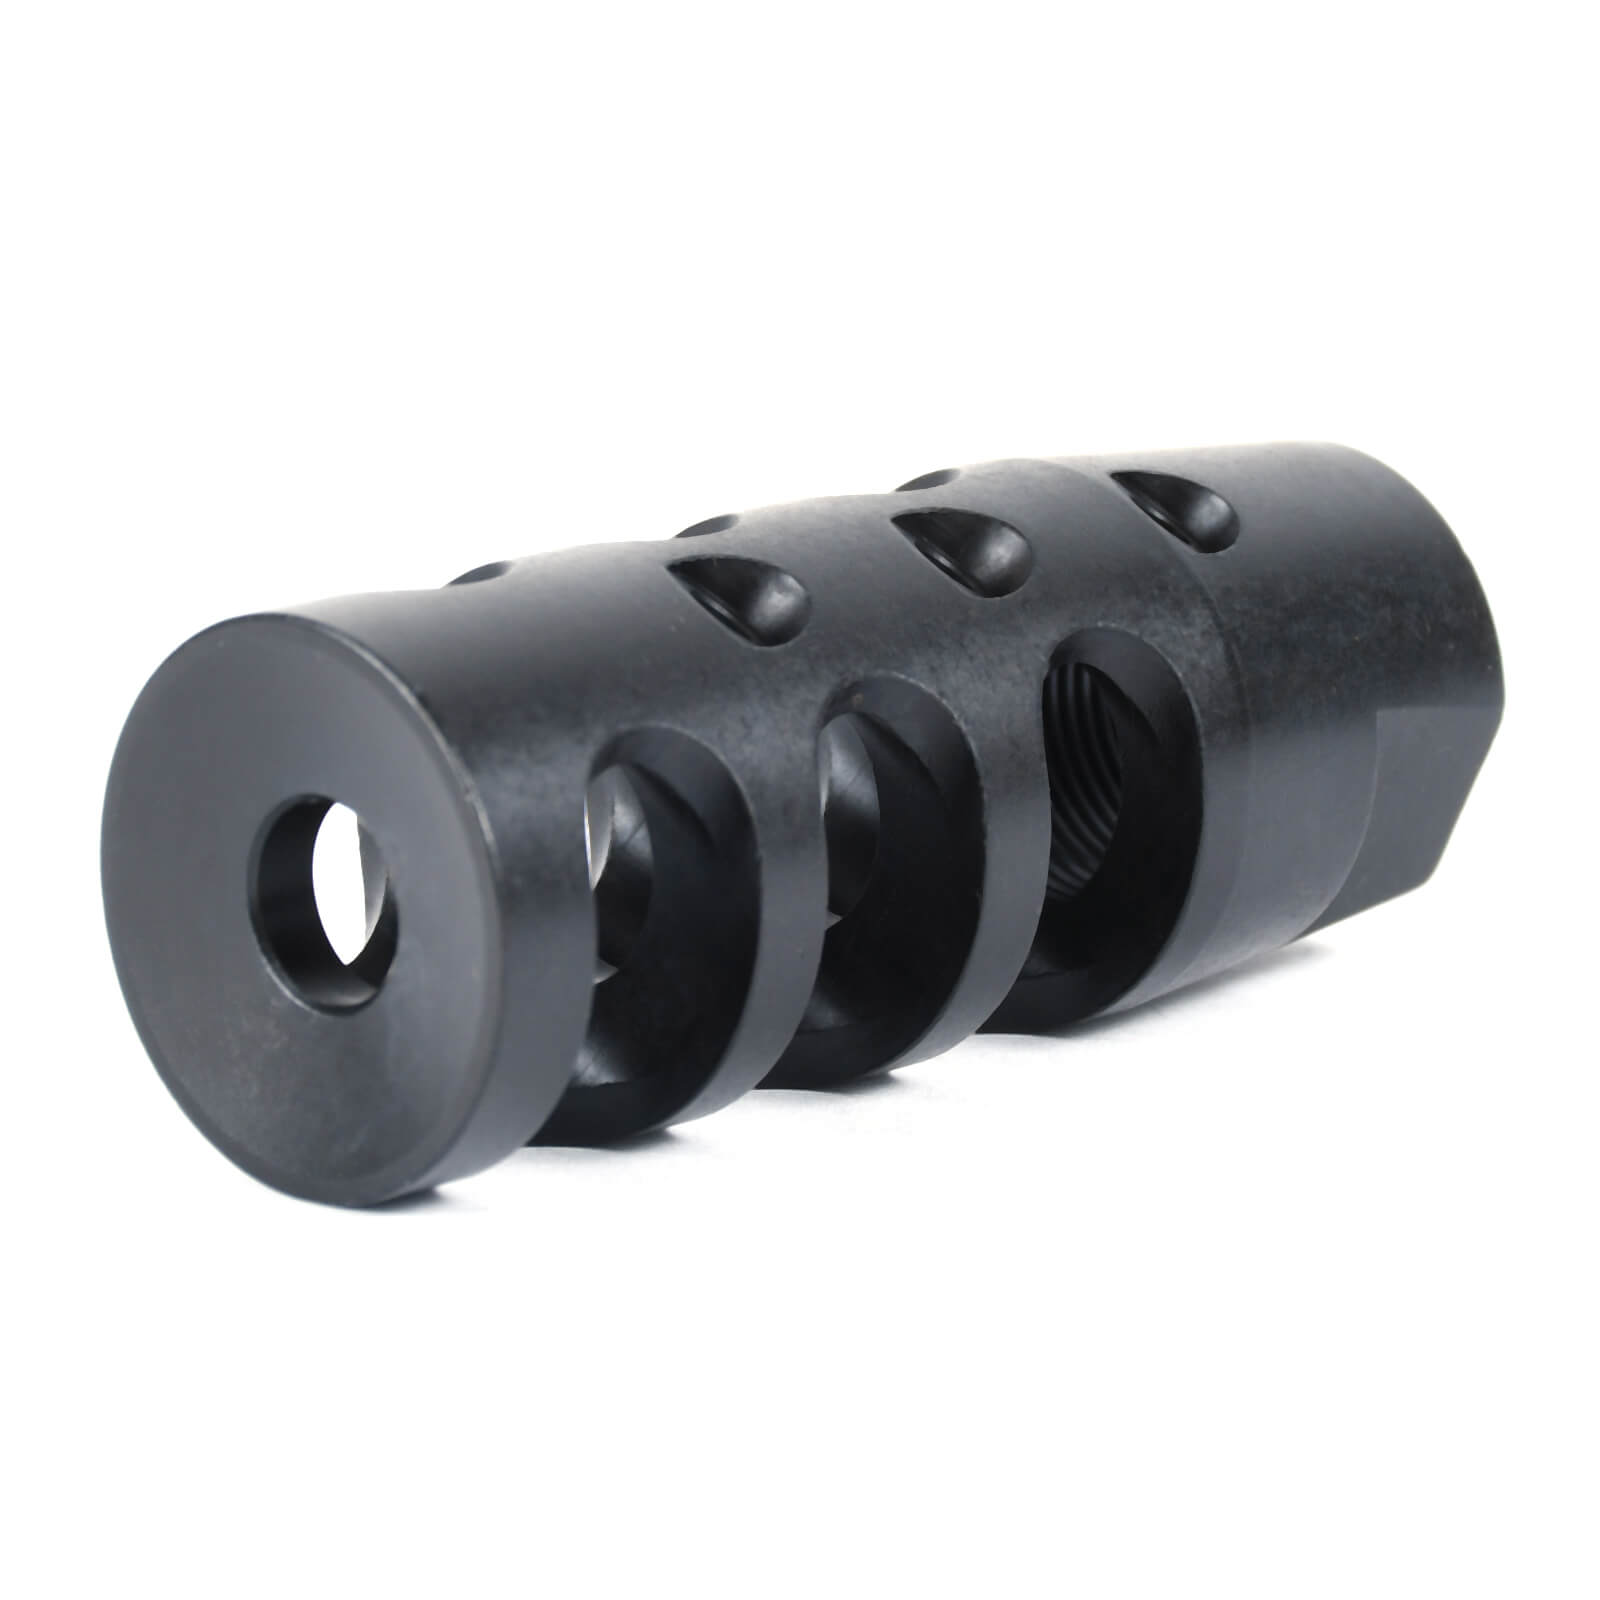 Grab a AT3™ AR-15 3-Port Muzzle Brake with Crush Washer - 5/8x24 Thread for...